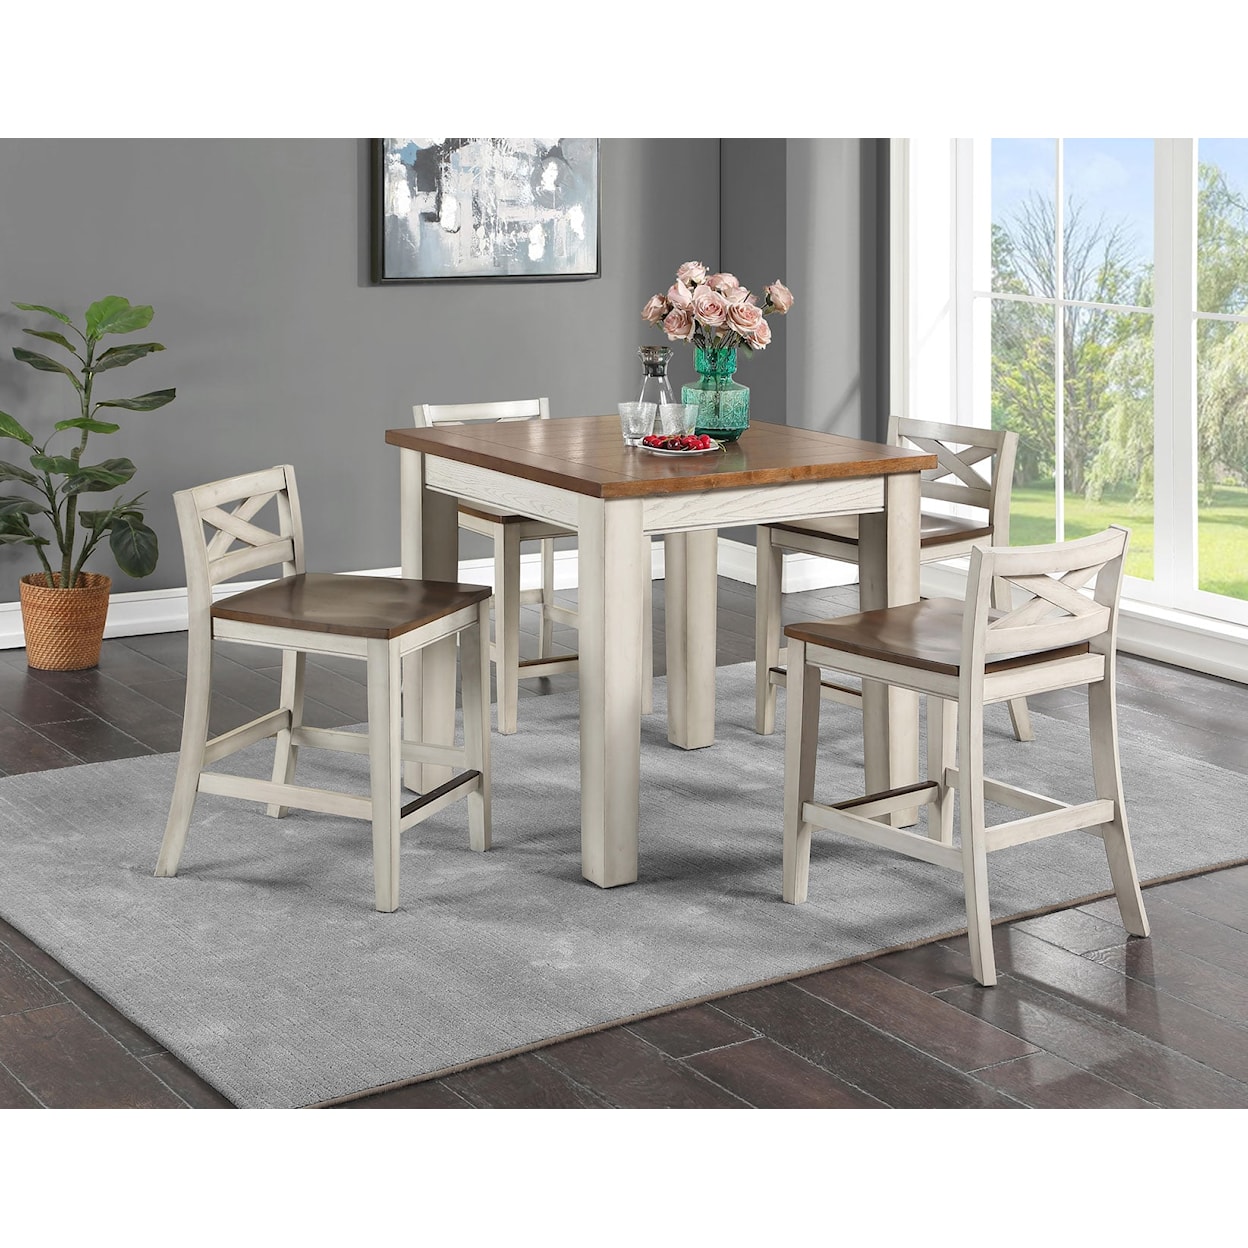 Prime Lindale 5-Piece Counter Dining Set